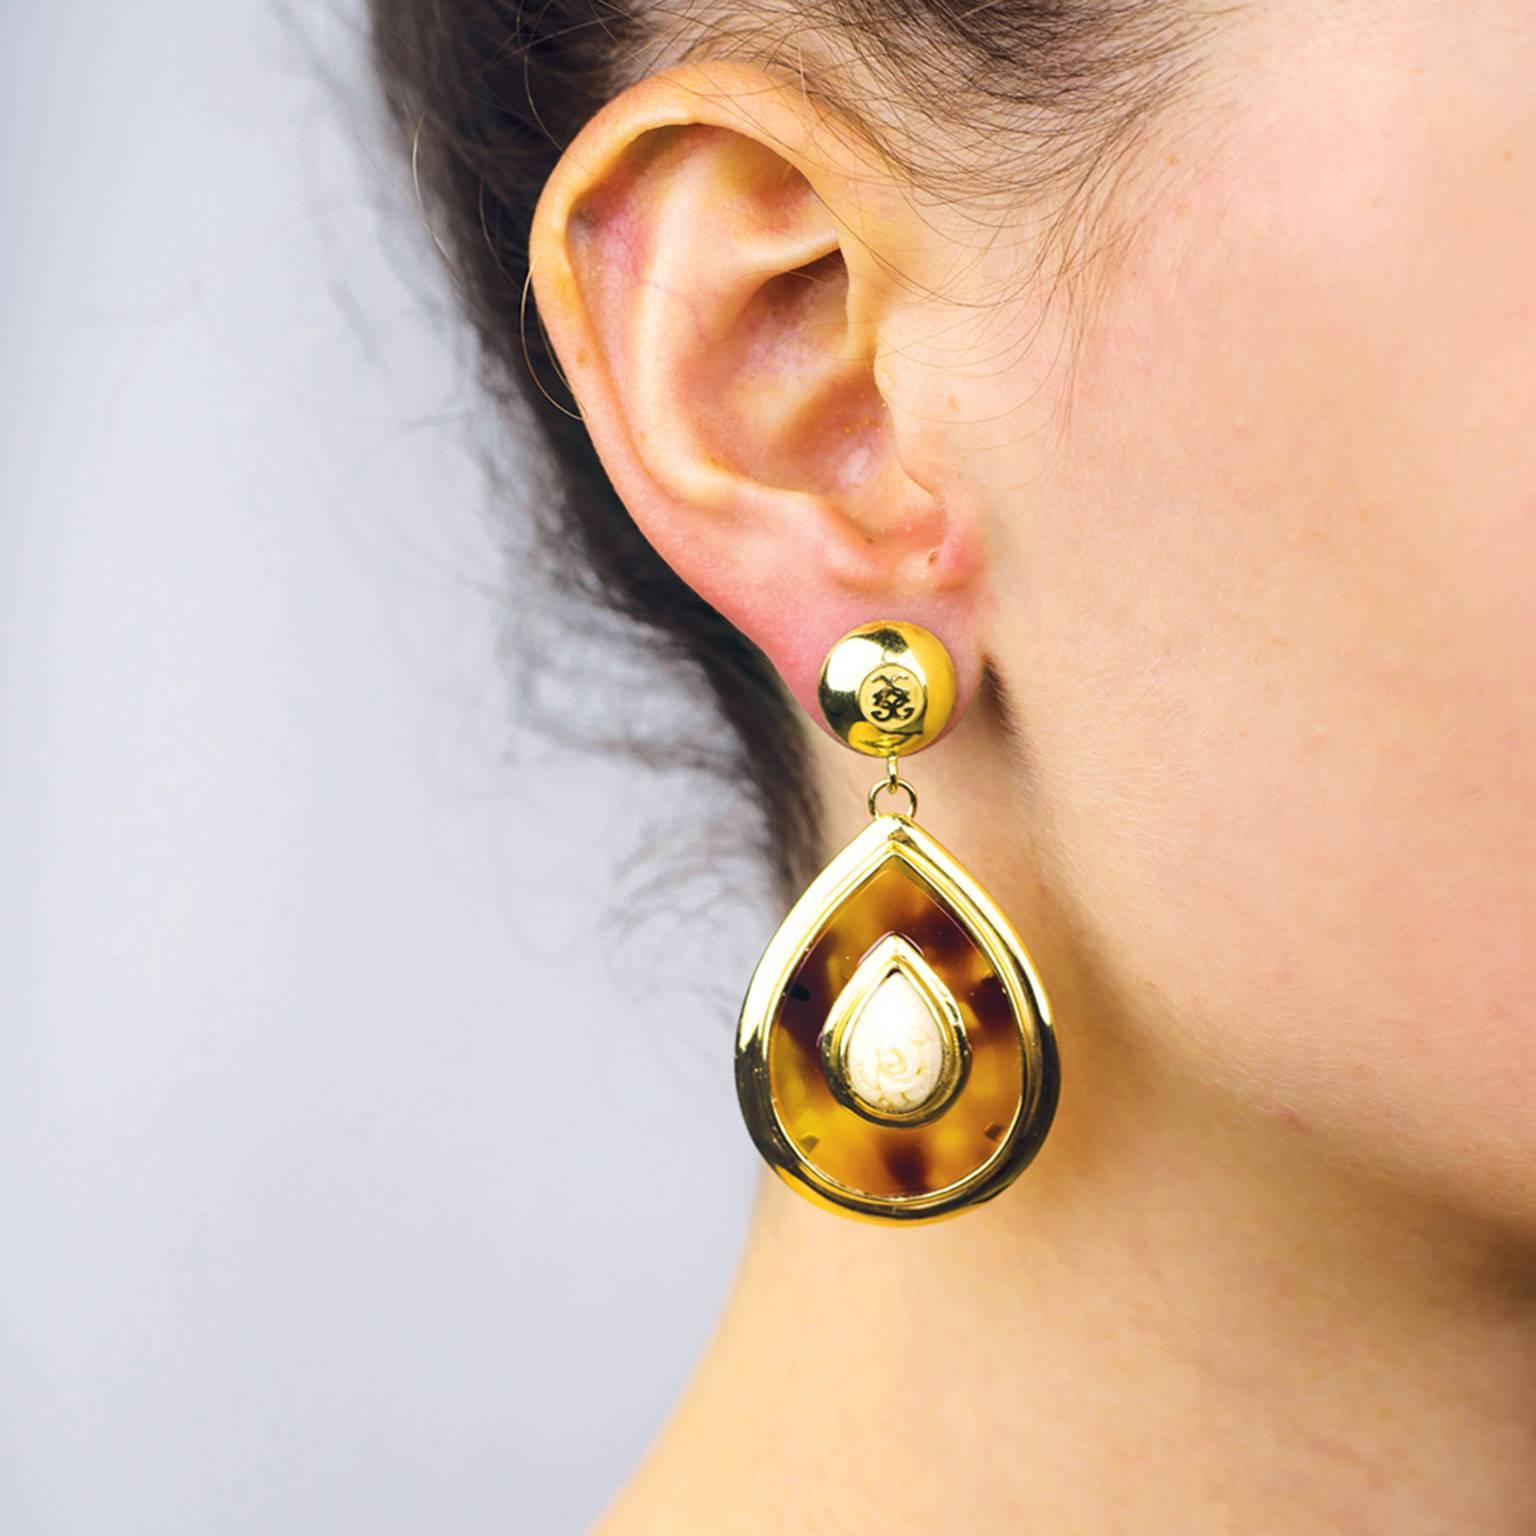 Our Primo Amore ‘Liscio’ earrings have a sleek, modern look, with a smooth, glossy setting giving a contemporary feel.  18 karat gold holds a luxuriously polished faux turtle teardrop.  The faux turtle is translucent, changing with the light and